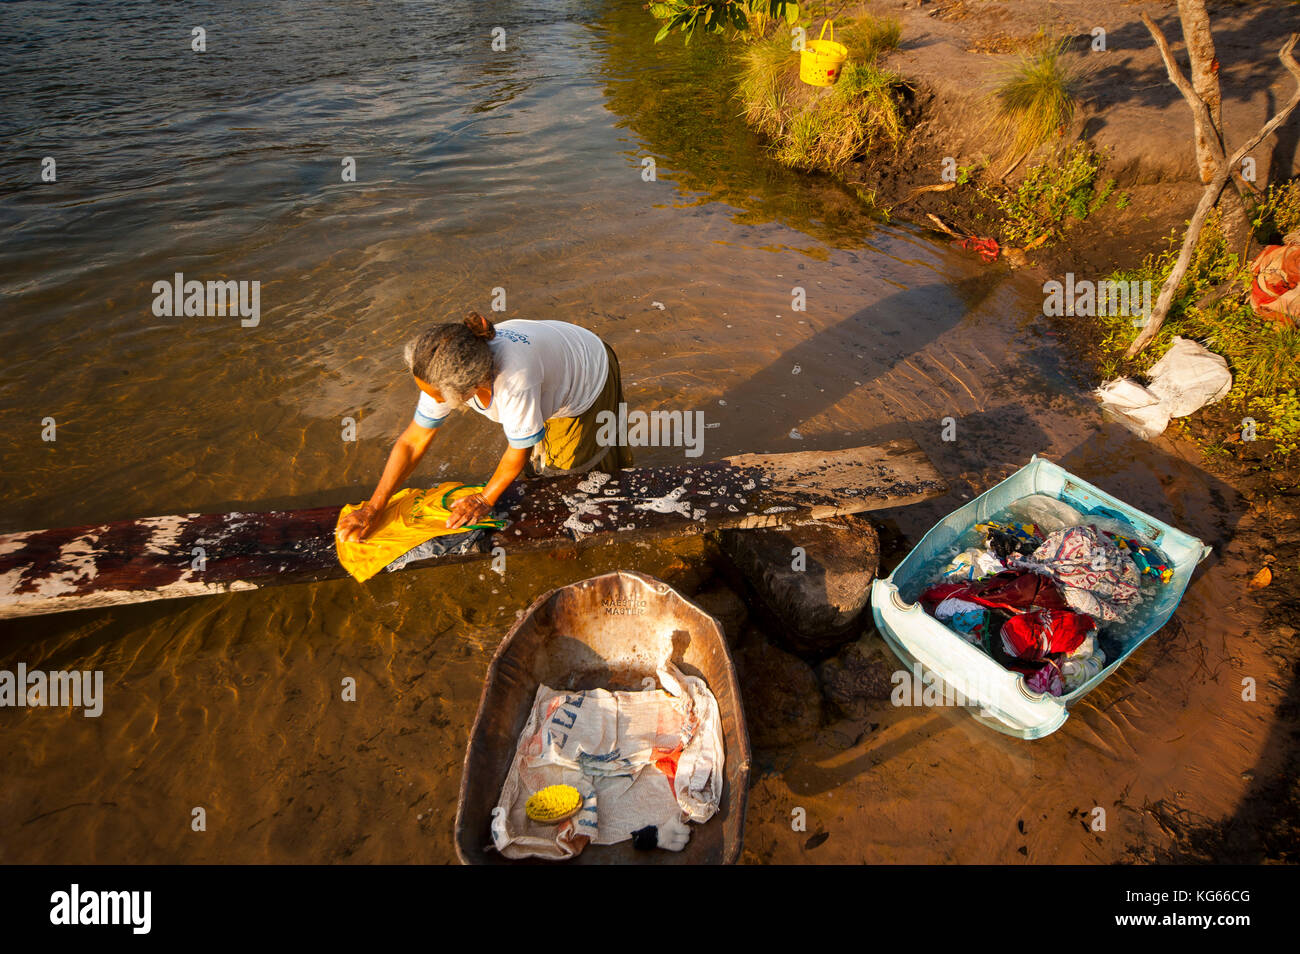 Old woman inabitant of remote area of Fumaça waterfall in Tocantins estate washing clothes in Balsas River, Brazil Stock Photo